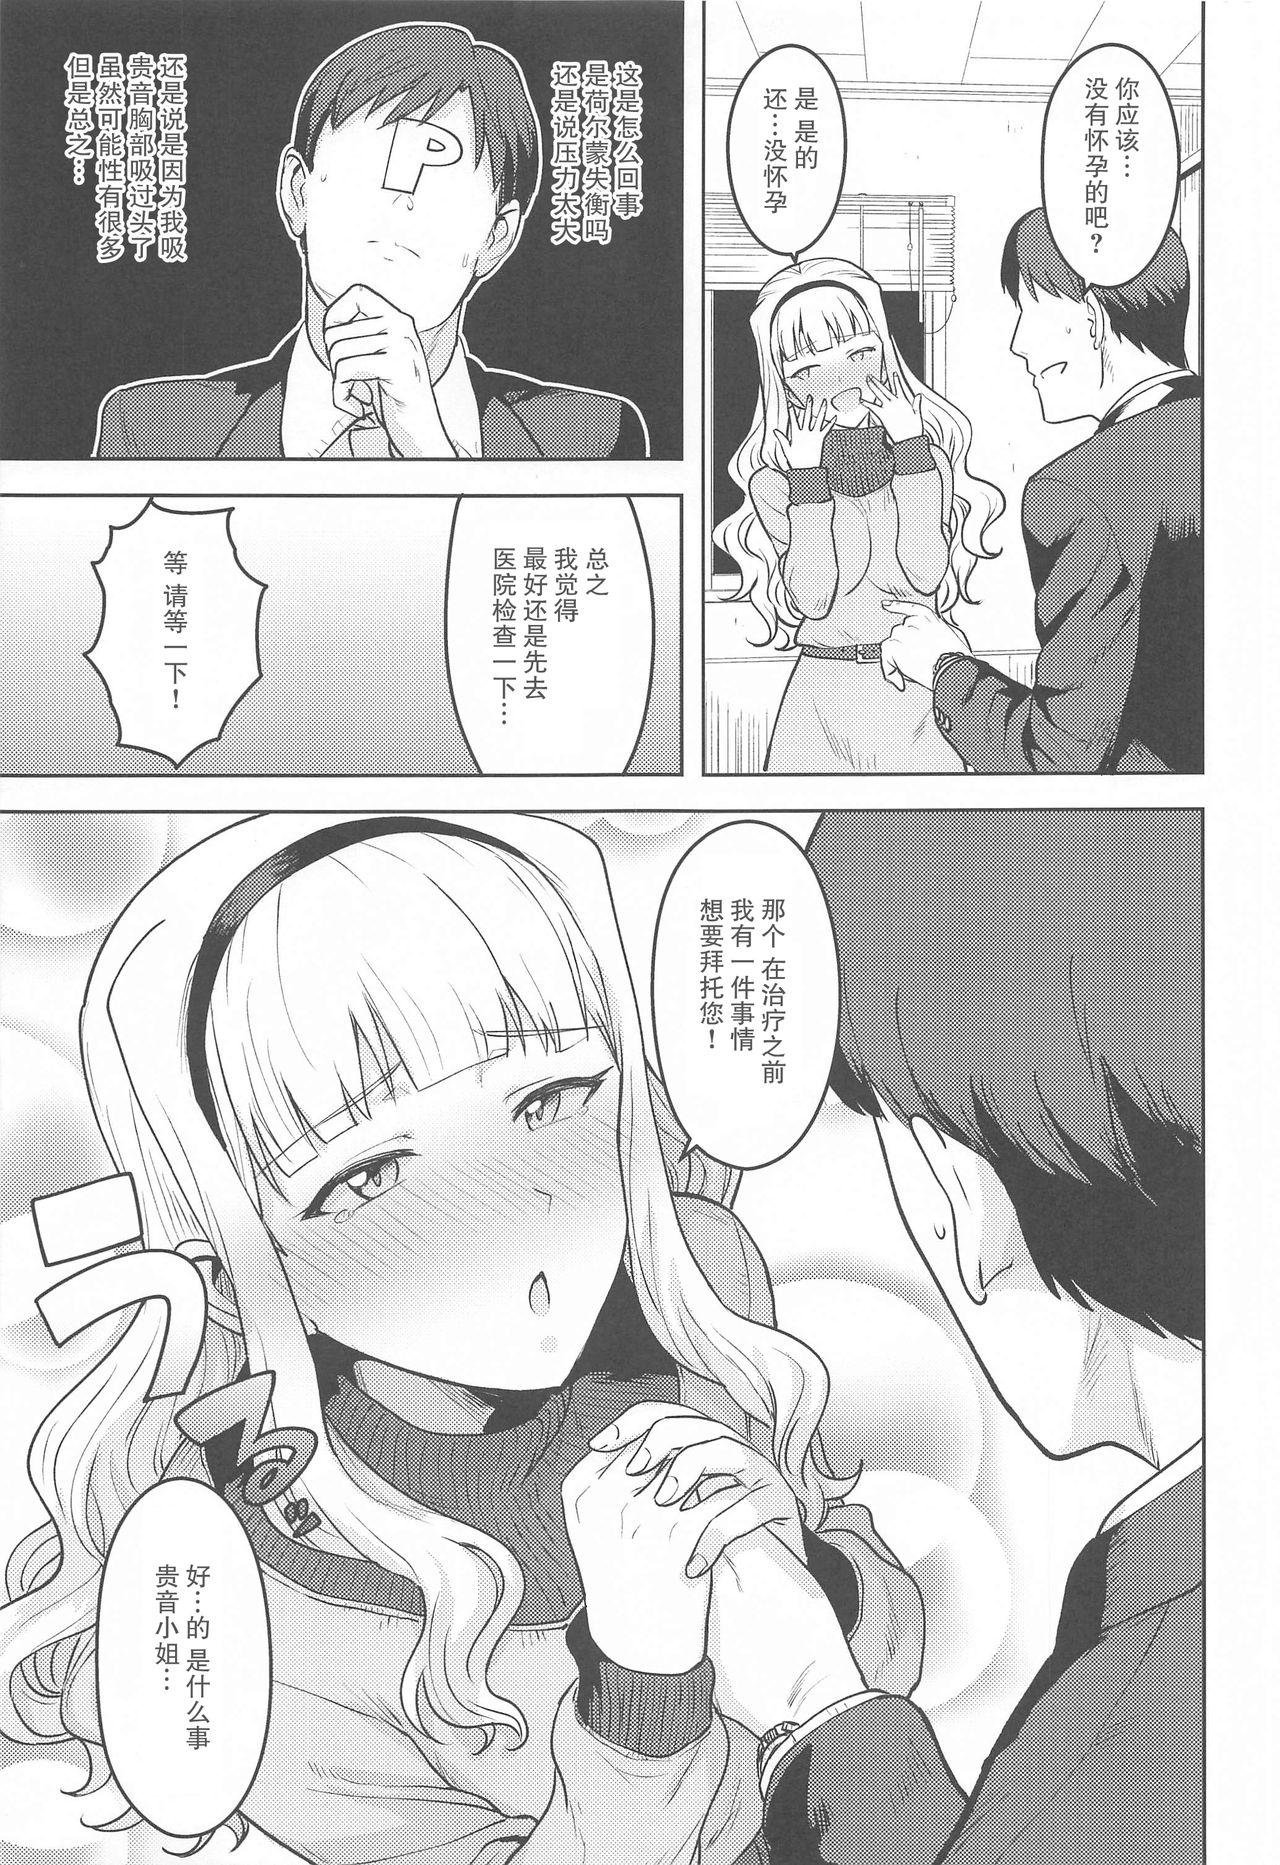 Wet Pussy Shiro ga Afurete... (THE iDOLM@STER - The idolmaster Moneytalks - Page 5